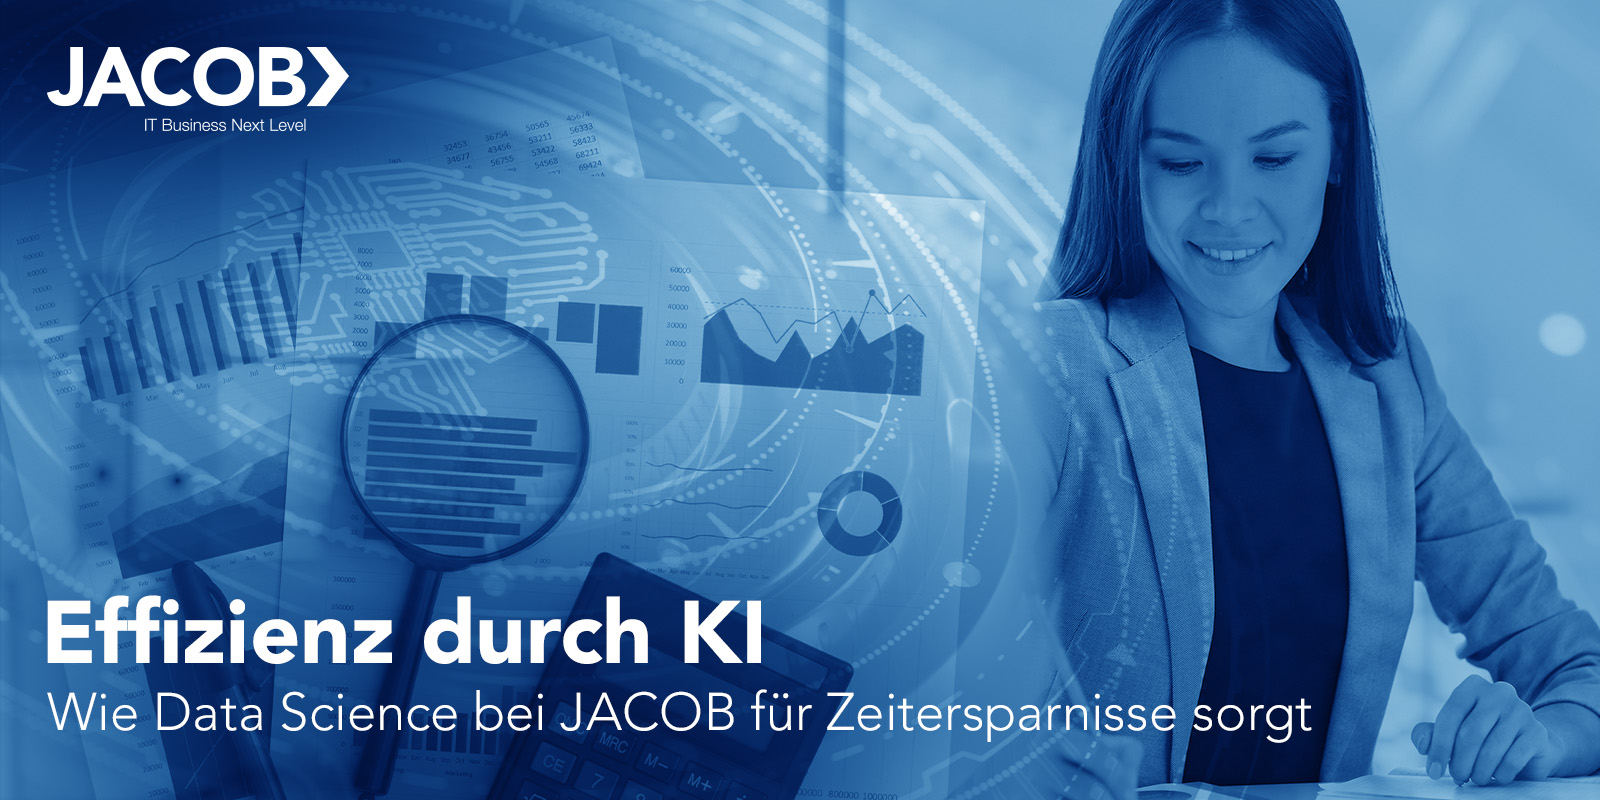 Data Science bei JACOB